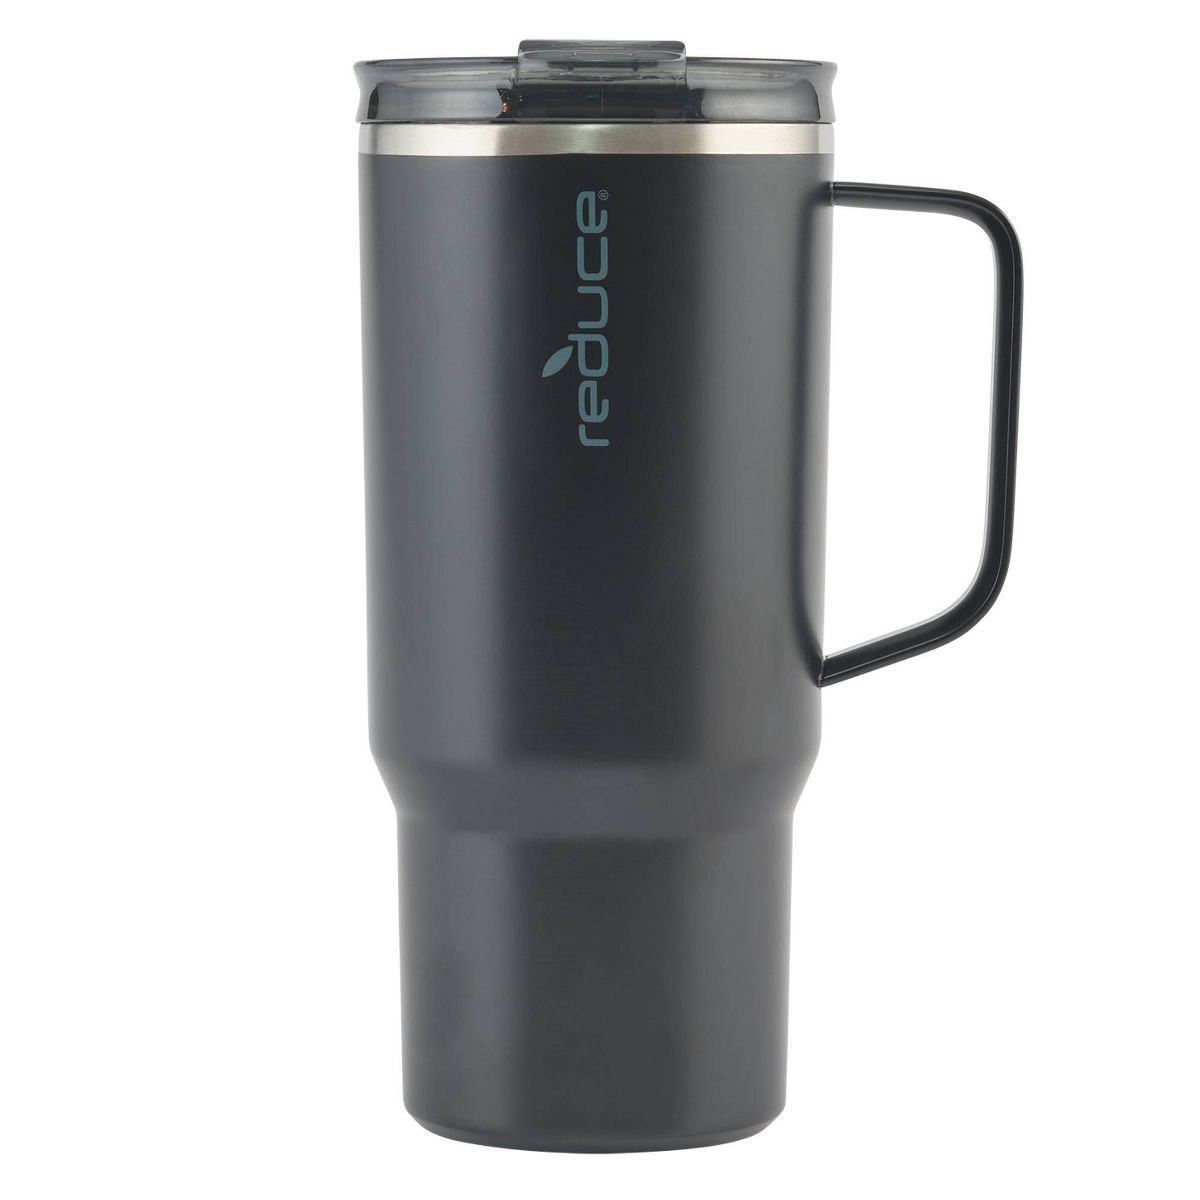 Reduce 24oz Hot1 Vacuum Insulated Stainless Steel Travel Mug with Steam Release Lid | Target